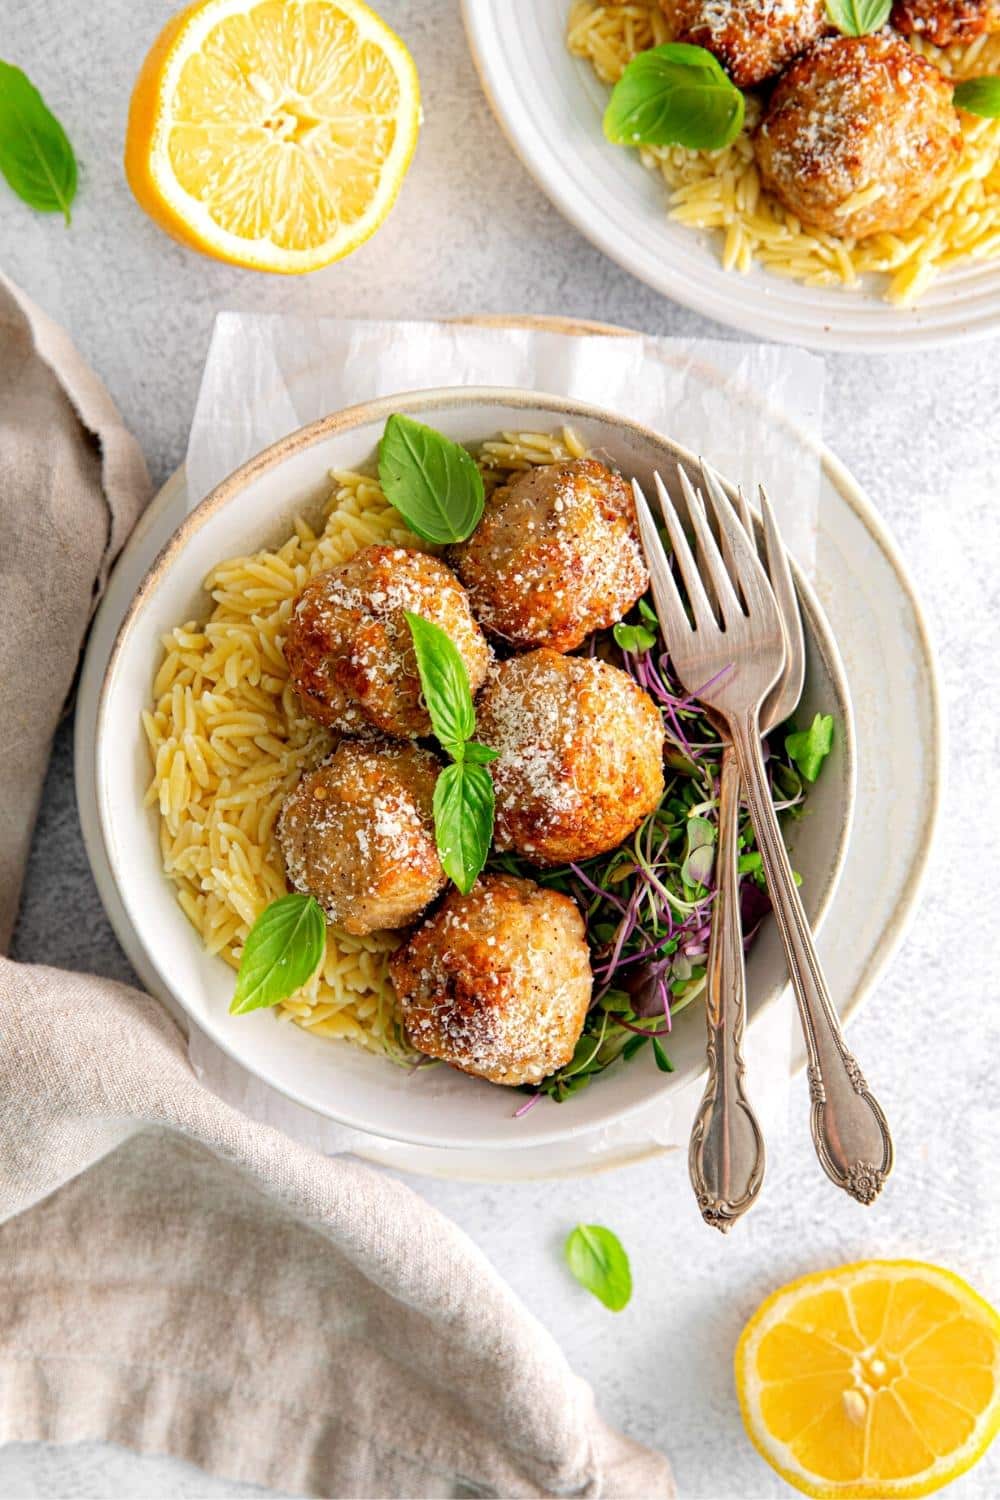 Lemon butter chicken meatballs served on orzo and drizzled with lemon brown butter sauce.